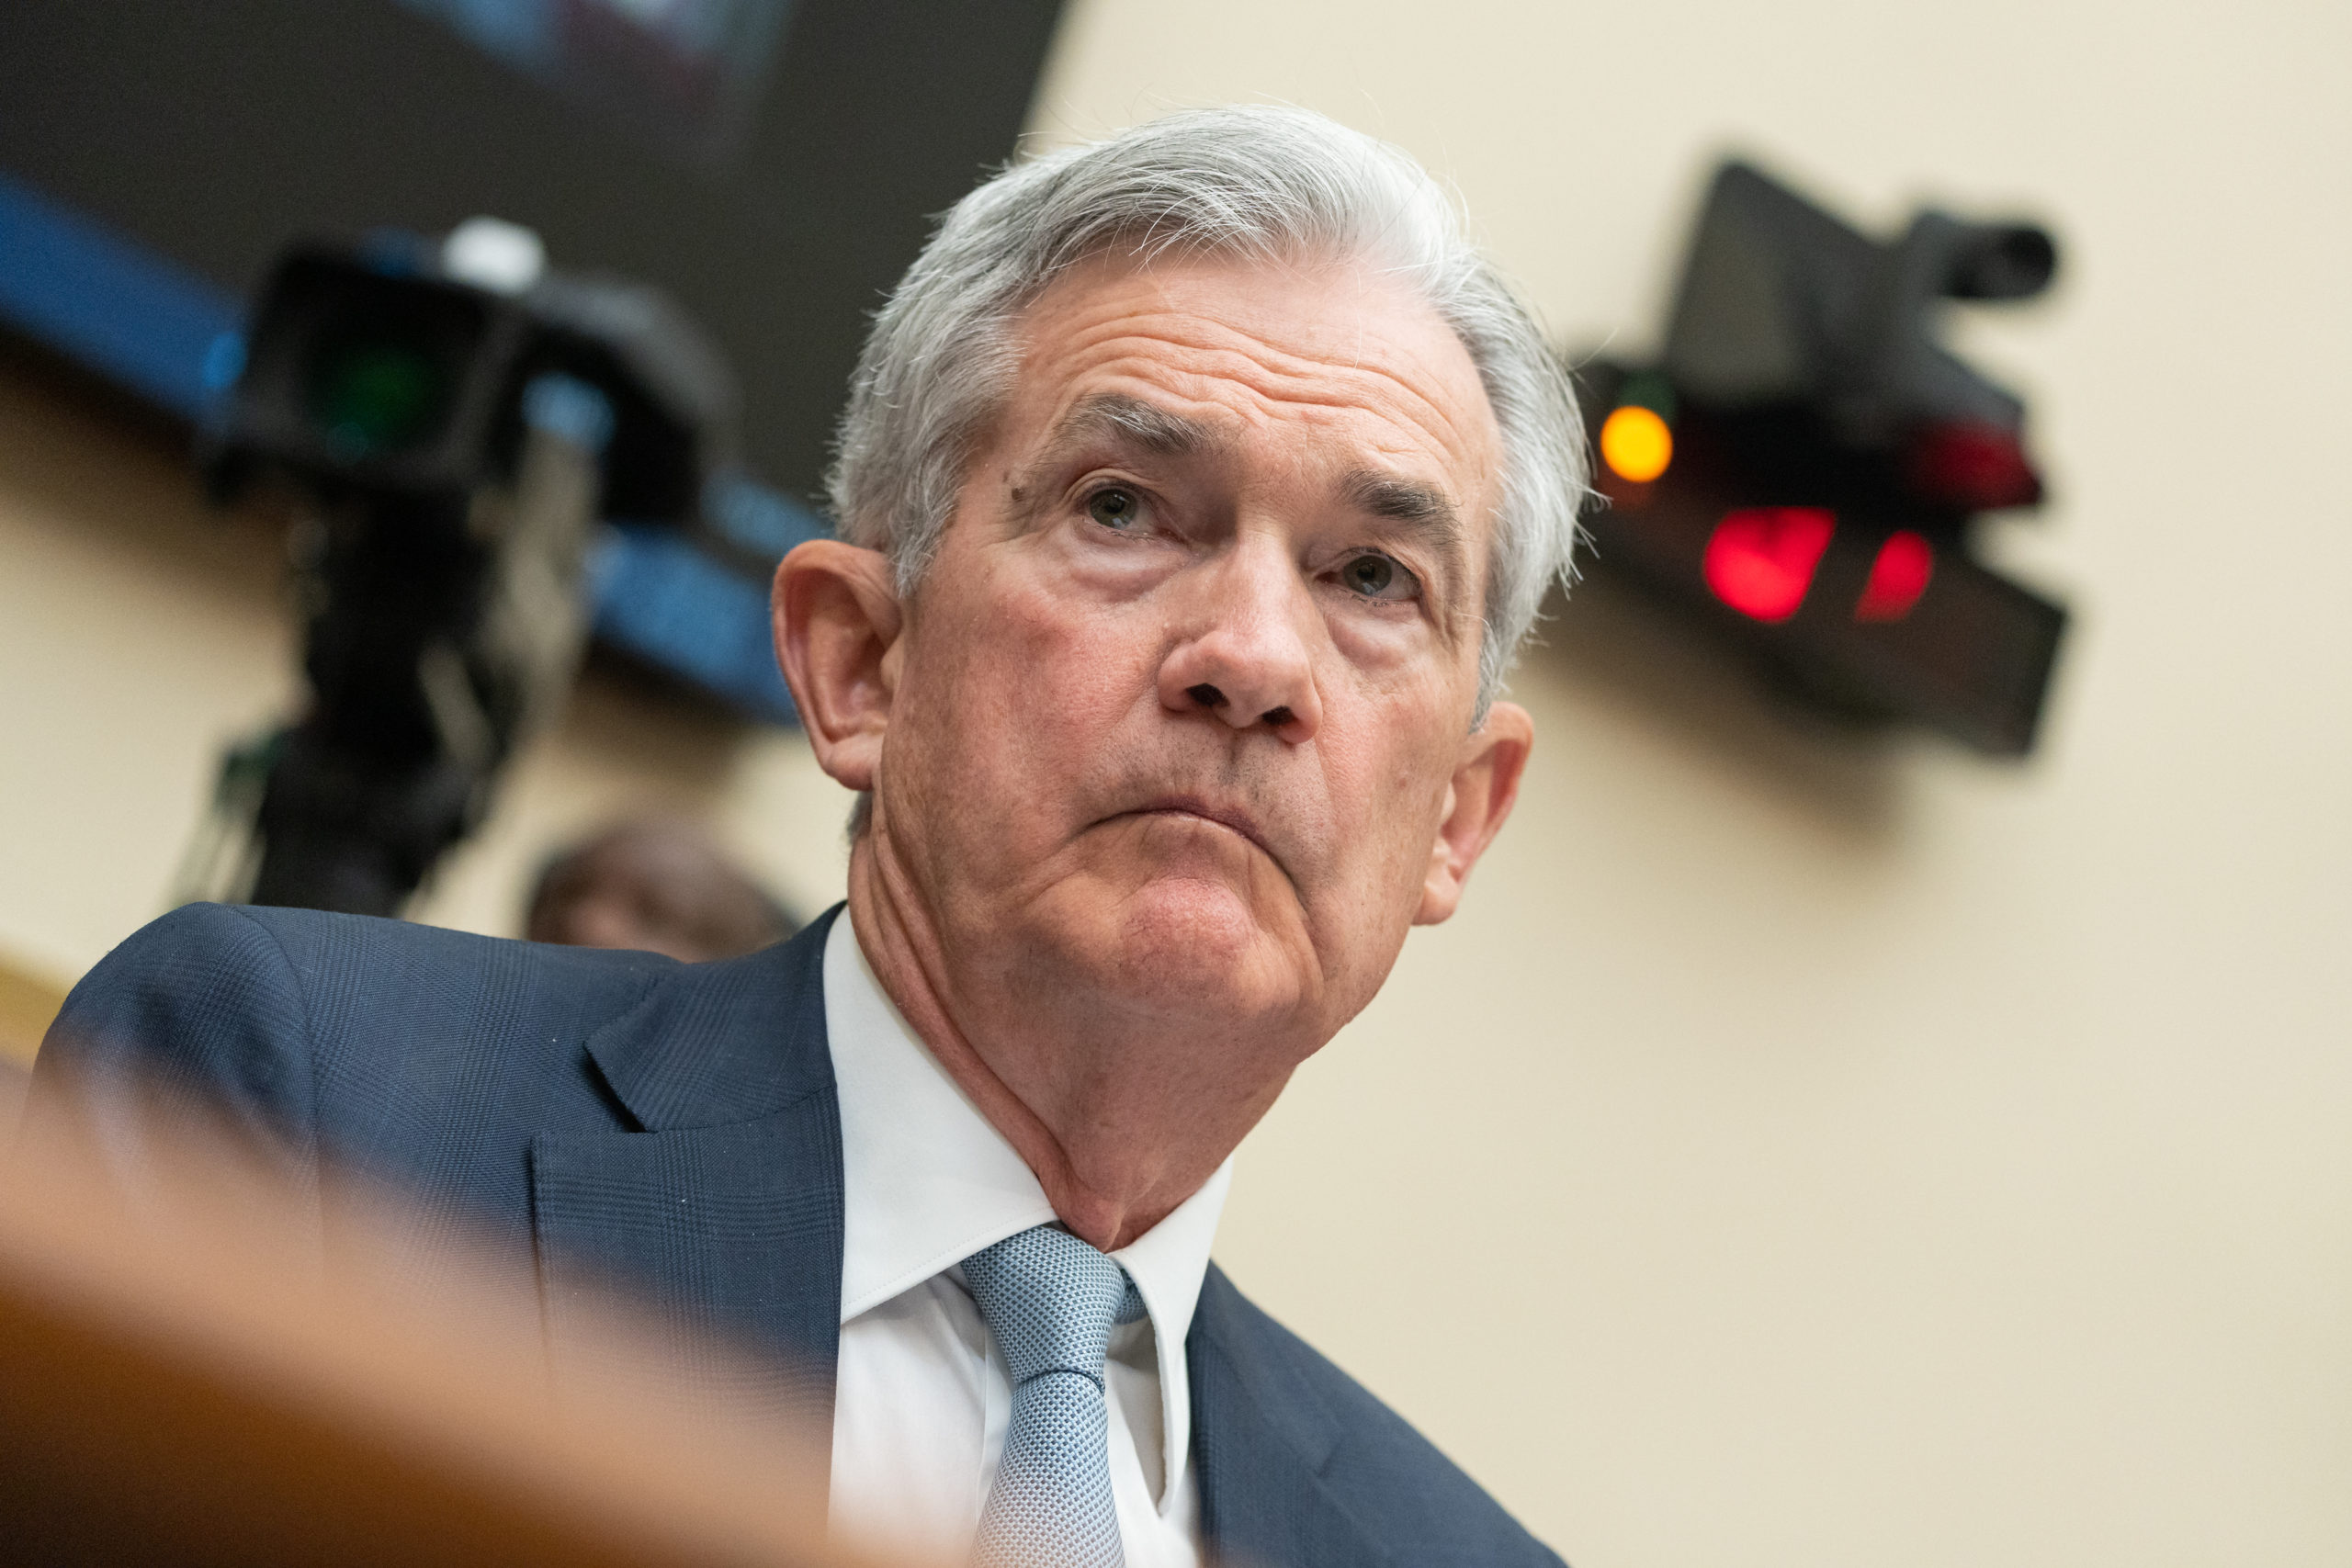 Powell’s path to 2% inflation needs luck or, failing that, pain: 'We can’t afford to be fooled again on this, or else it’s going to get beyond us'